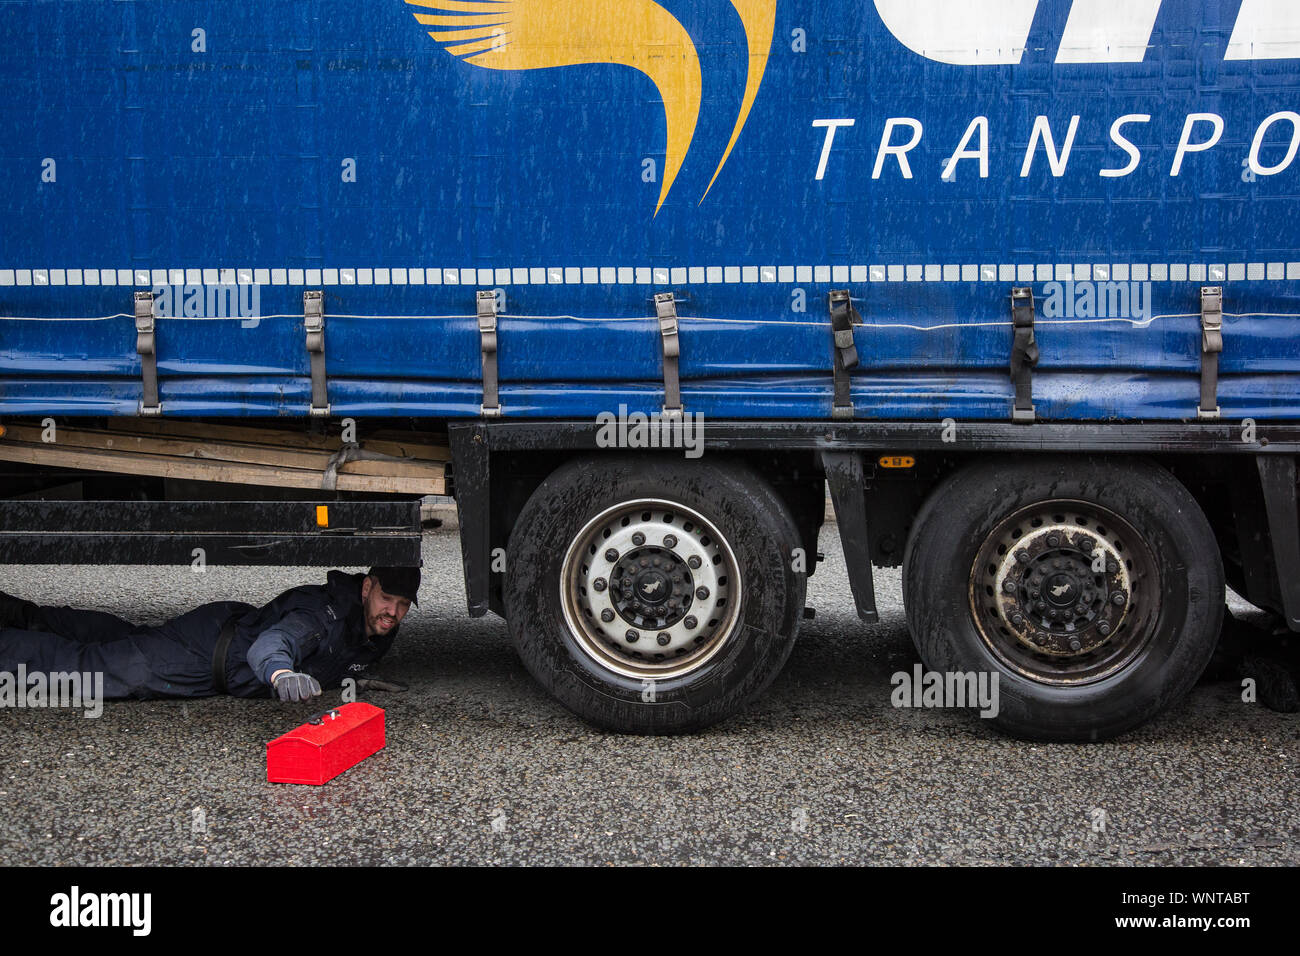 London, UK. 6 September, 2019. A Metropolitan Police officer prepares to remove an activist locked beneath a truck making a delivery to ExCel London for DSEI, the world’s largest arms fair. The road remained blocked for several hours. The fifth day of protests against the arms fair was themed as Stop The Arms Fair: Stop Climate Change in order to highlight links between the fossil fuel and arms industries. Credit: Mark Kerrison/Alamy Live News Stock Photo